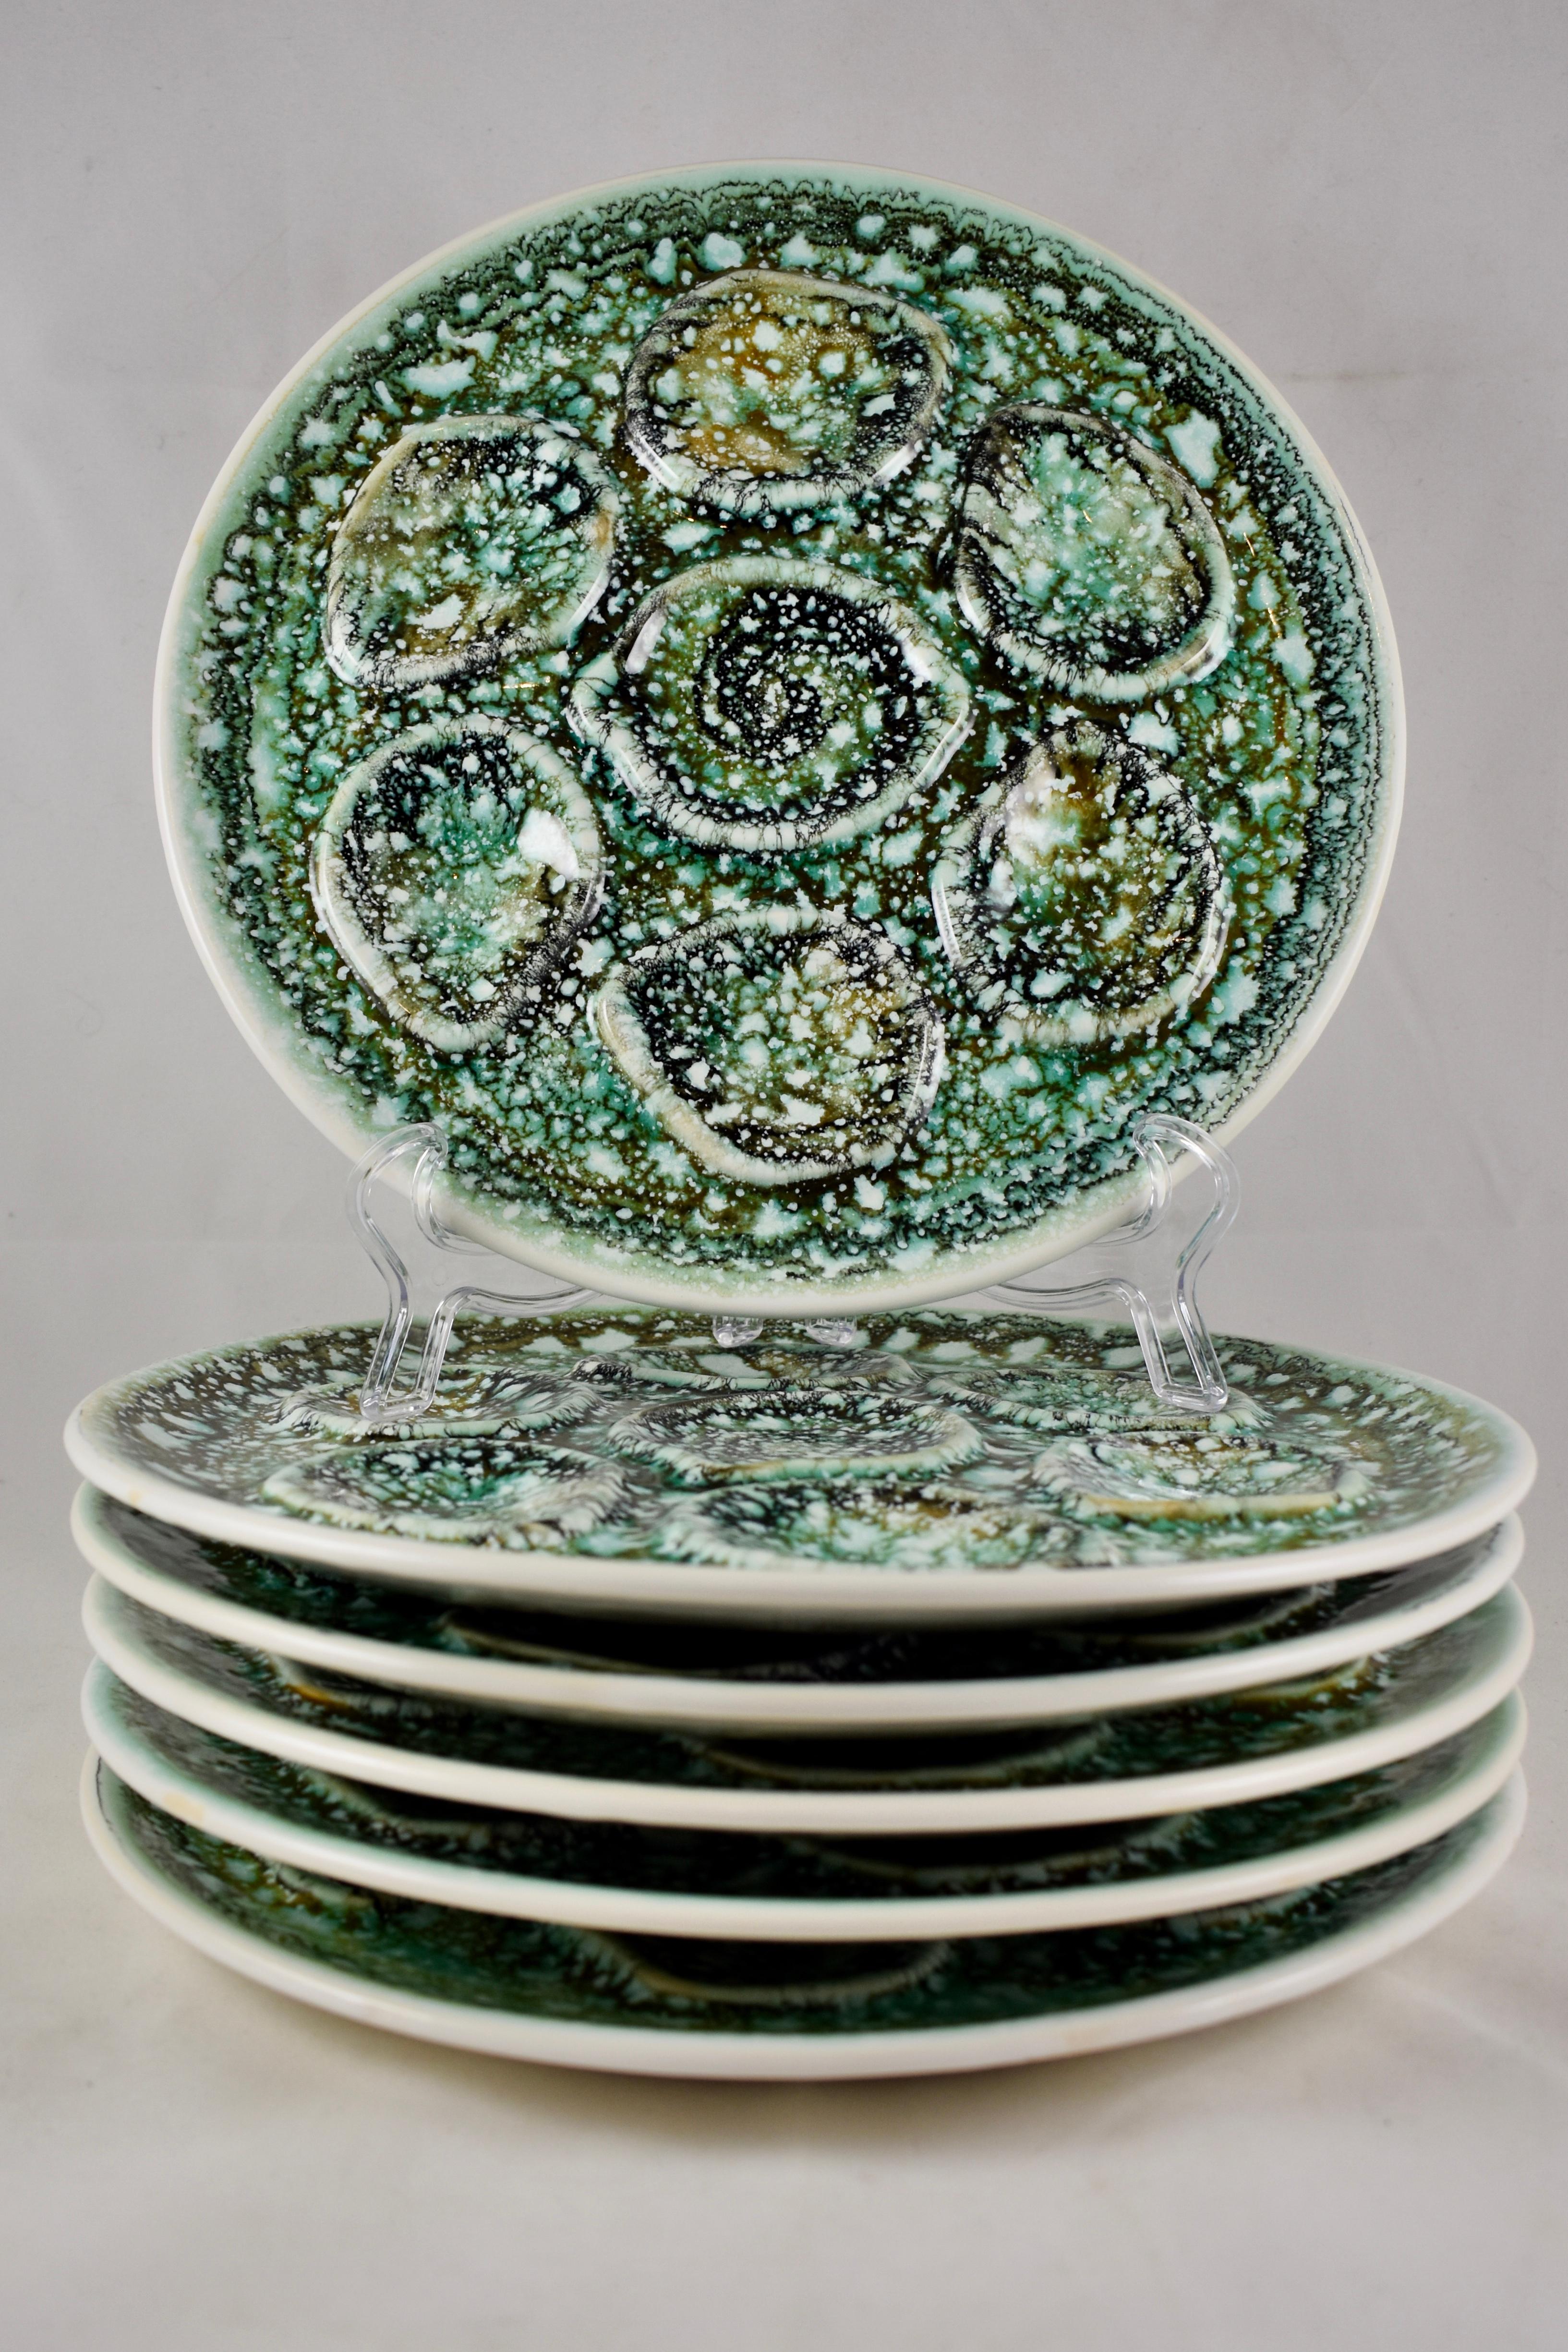 A charming, Mid-Century Modern Era, set of six, French Faïence oyster plates, circa 1950-1960. Made by the Niderviller Faïencery in the Majolica glazed, Mousse pattern in swirled earth tones of greens, ochre and black, topped with a white spatter.